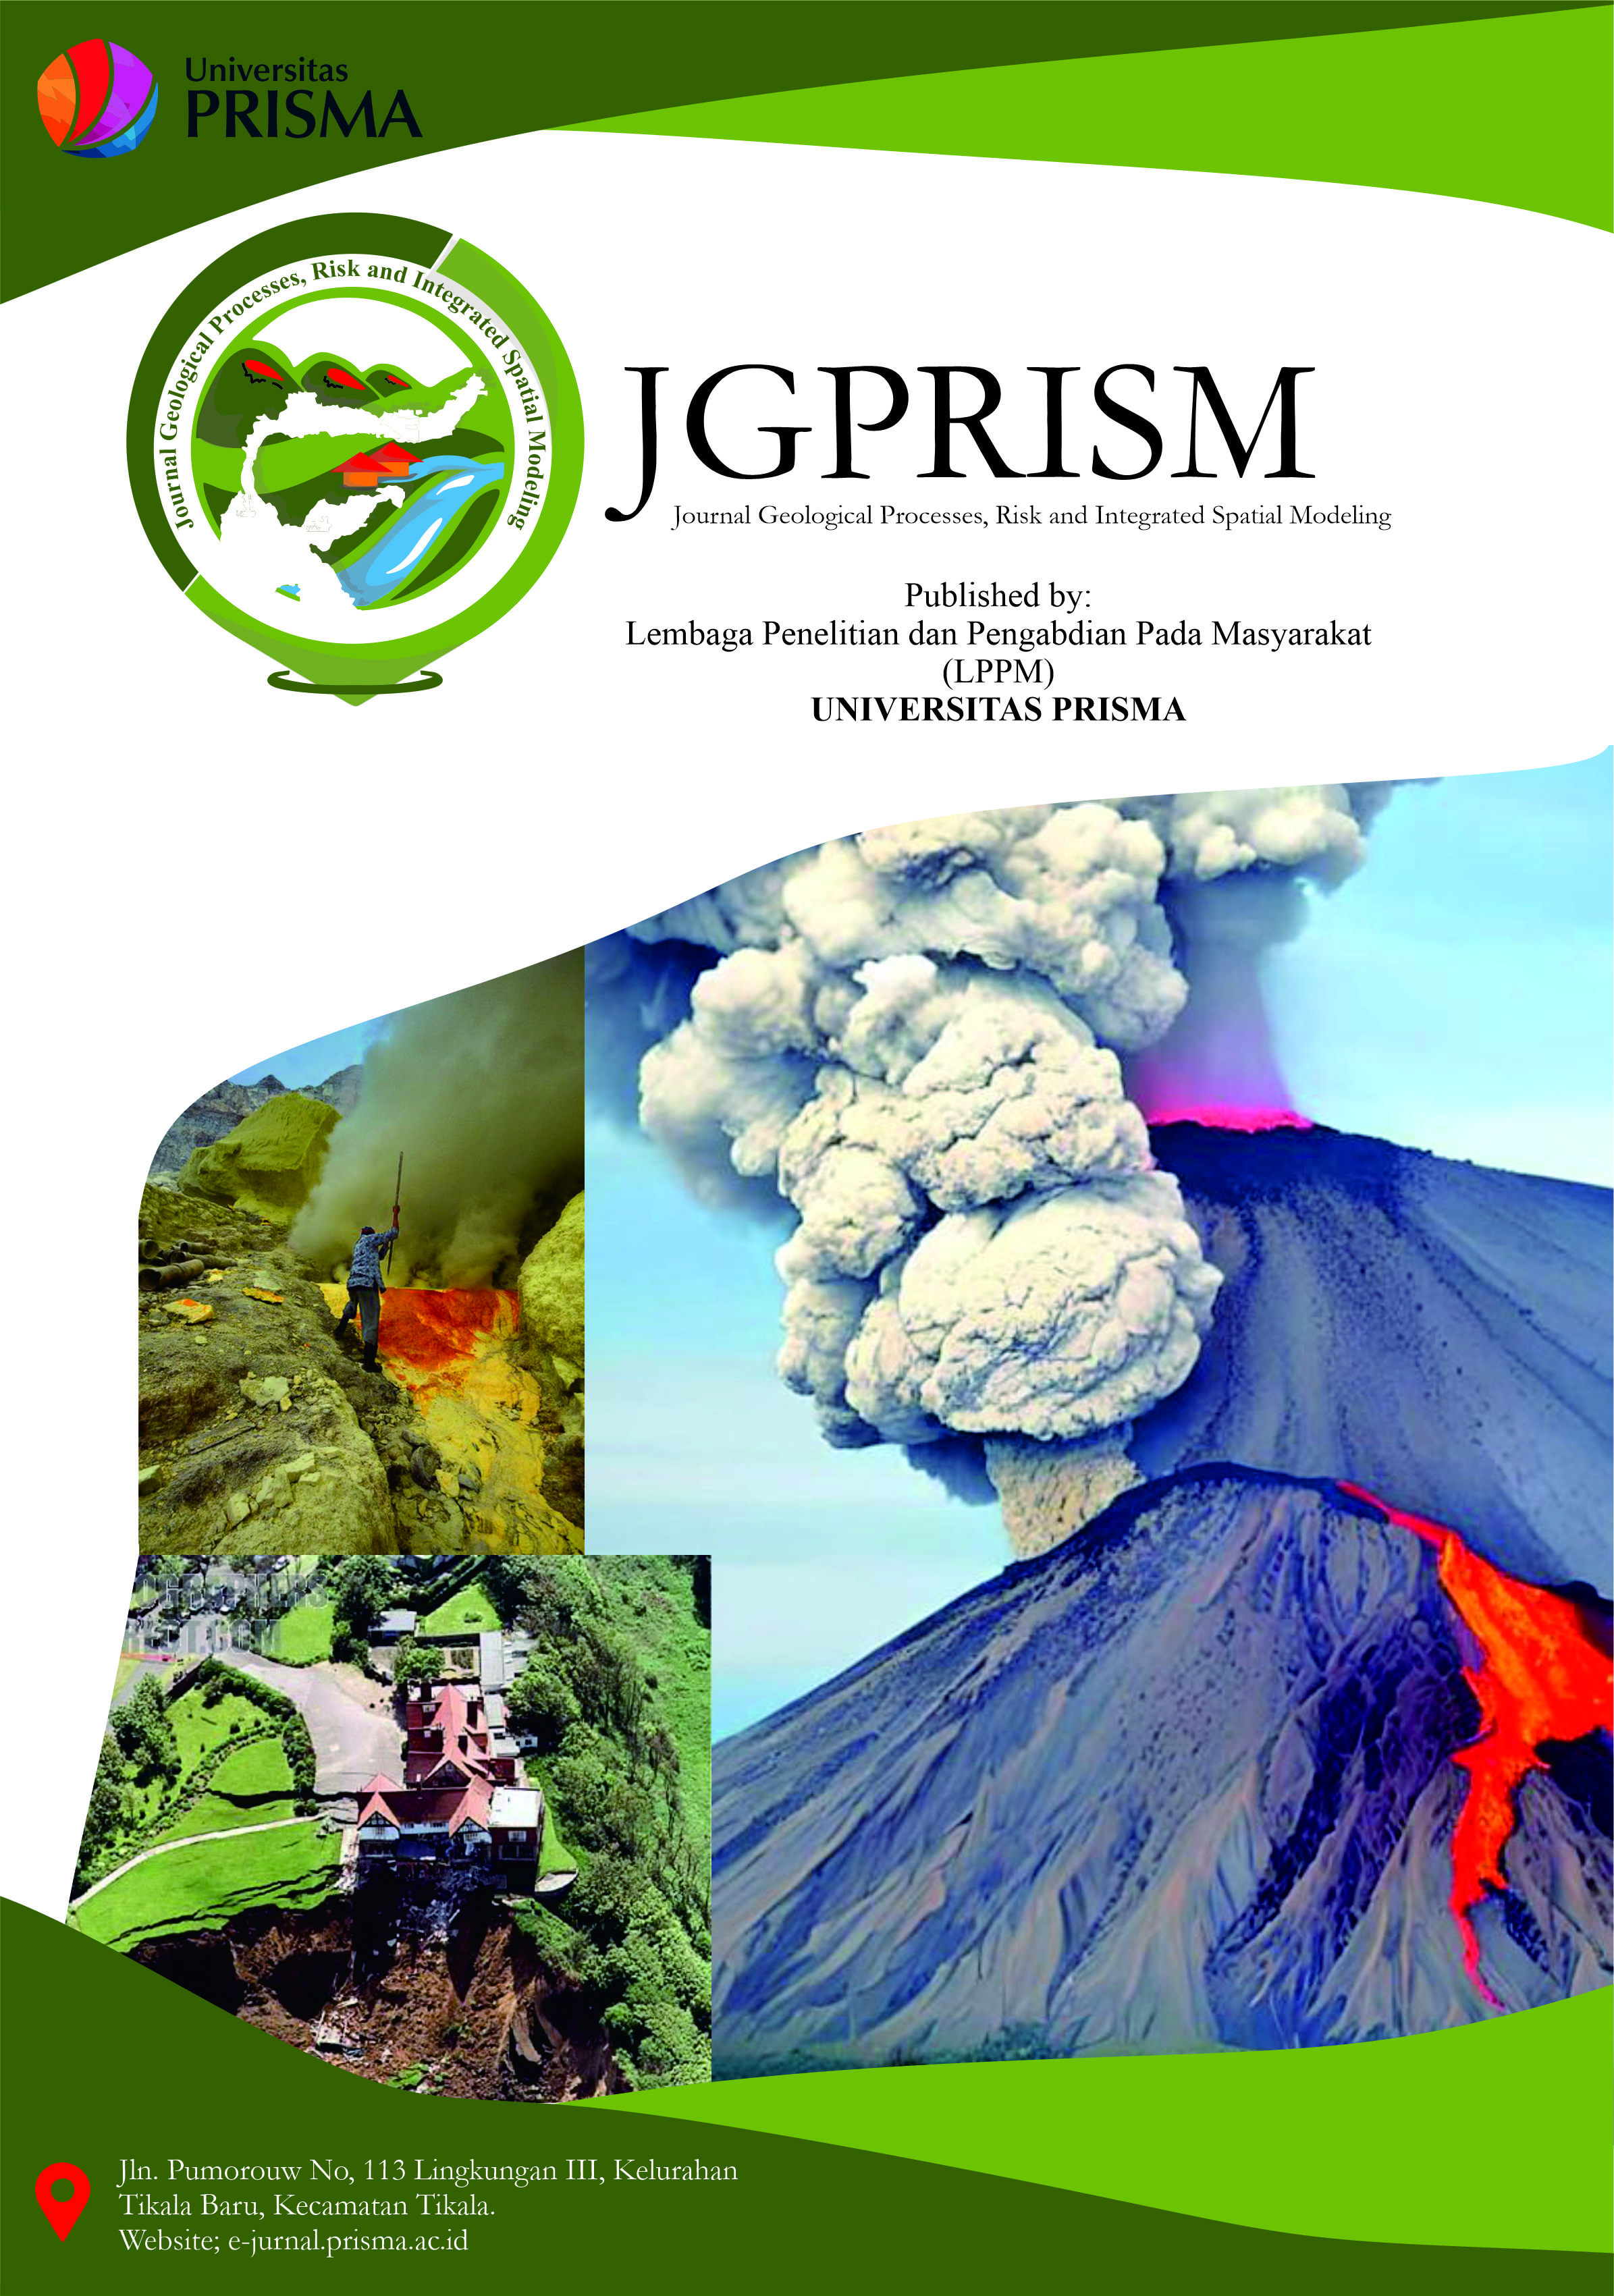 This journal discusses all fields of knowledge related to Geological Processes, Risk and Integrated Spatial Modeling